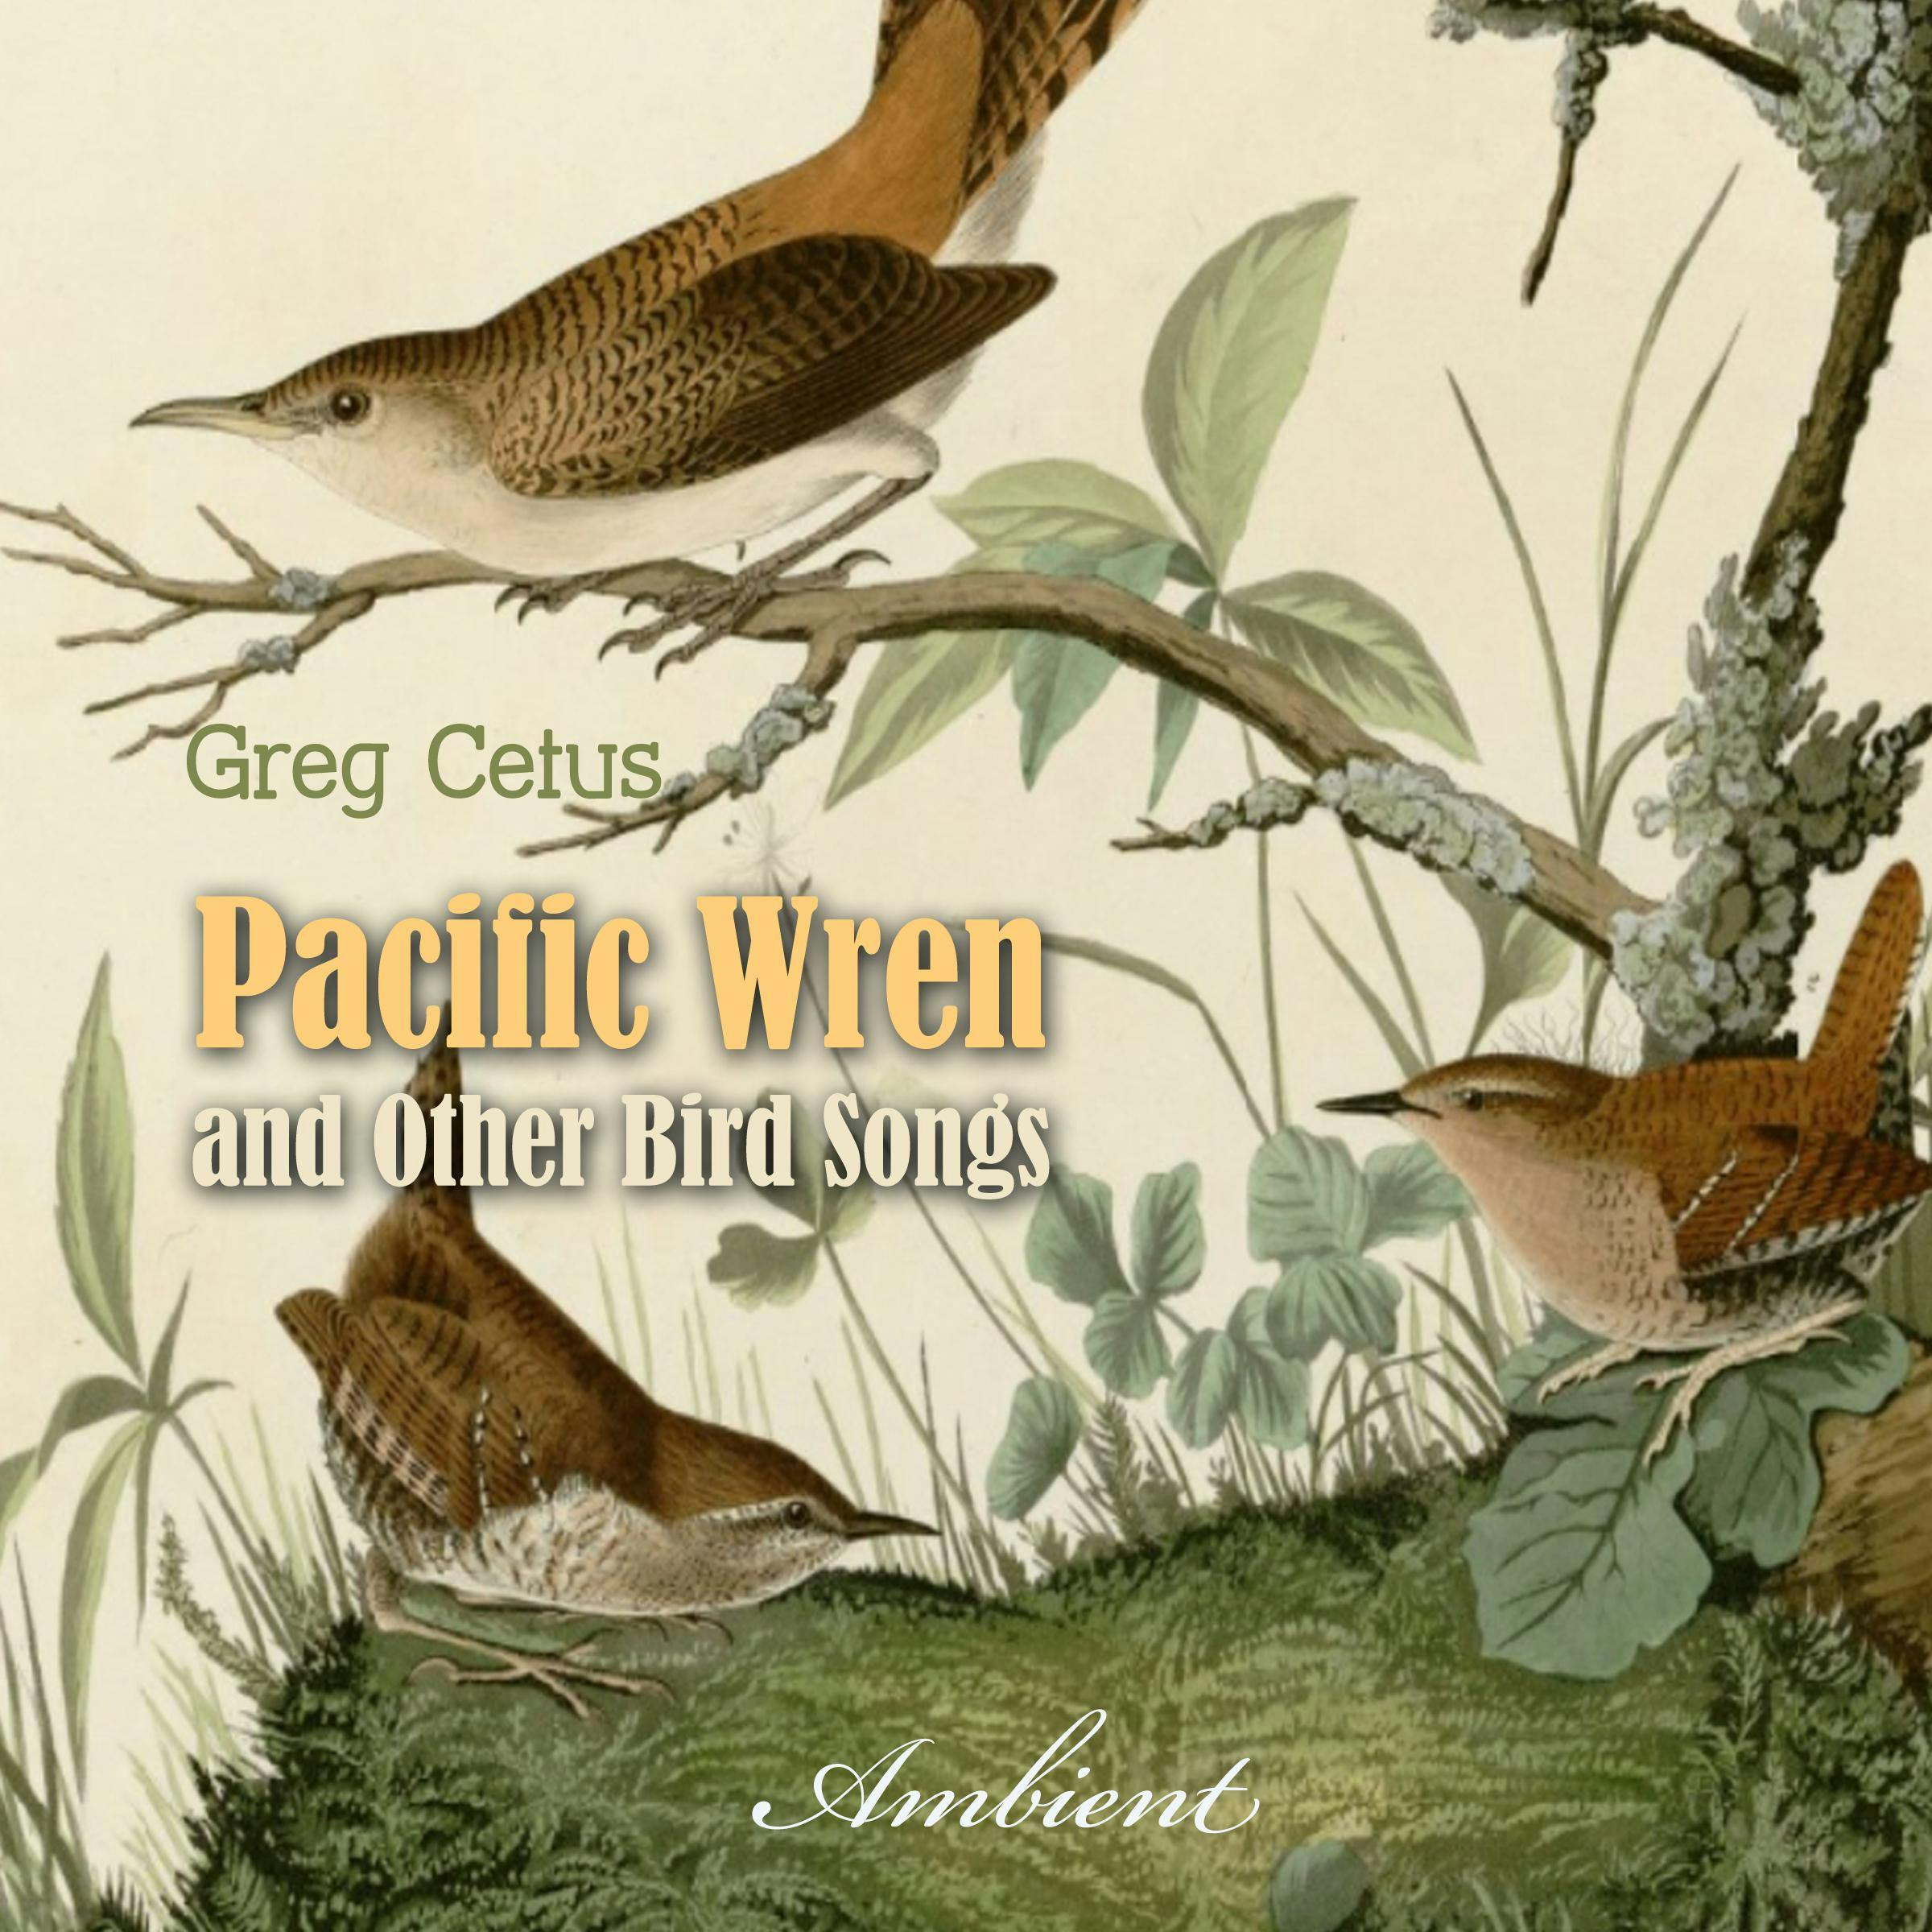 Pacific Wren and Other Bird Songs: Nature Sounds for Good Mood - Greg Cetus